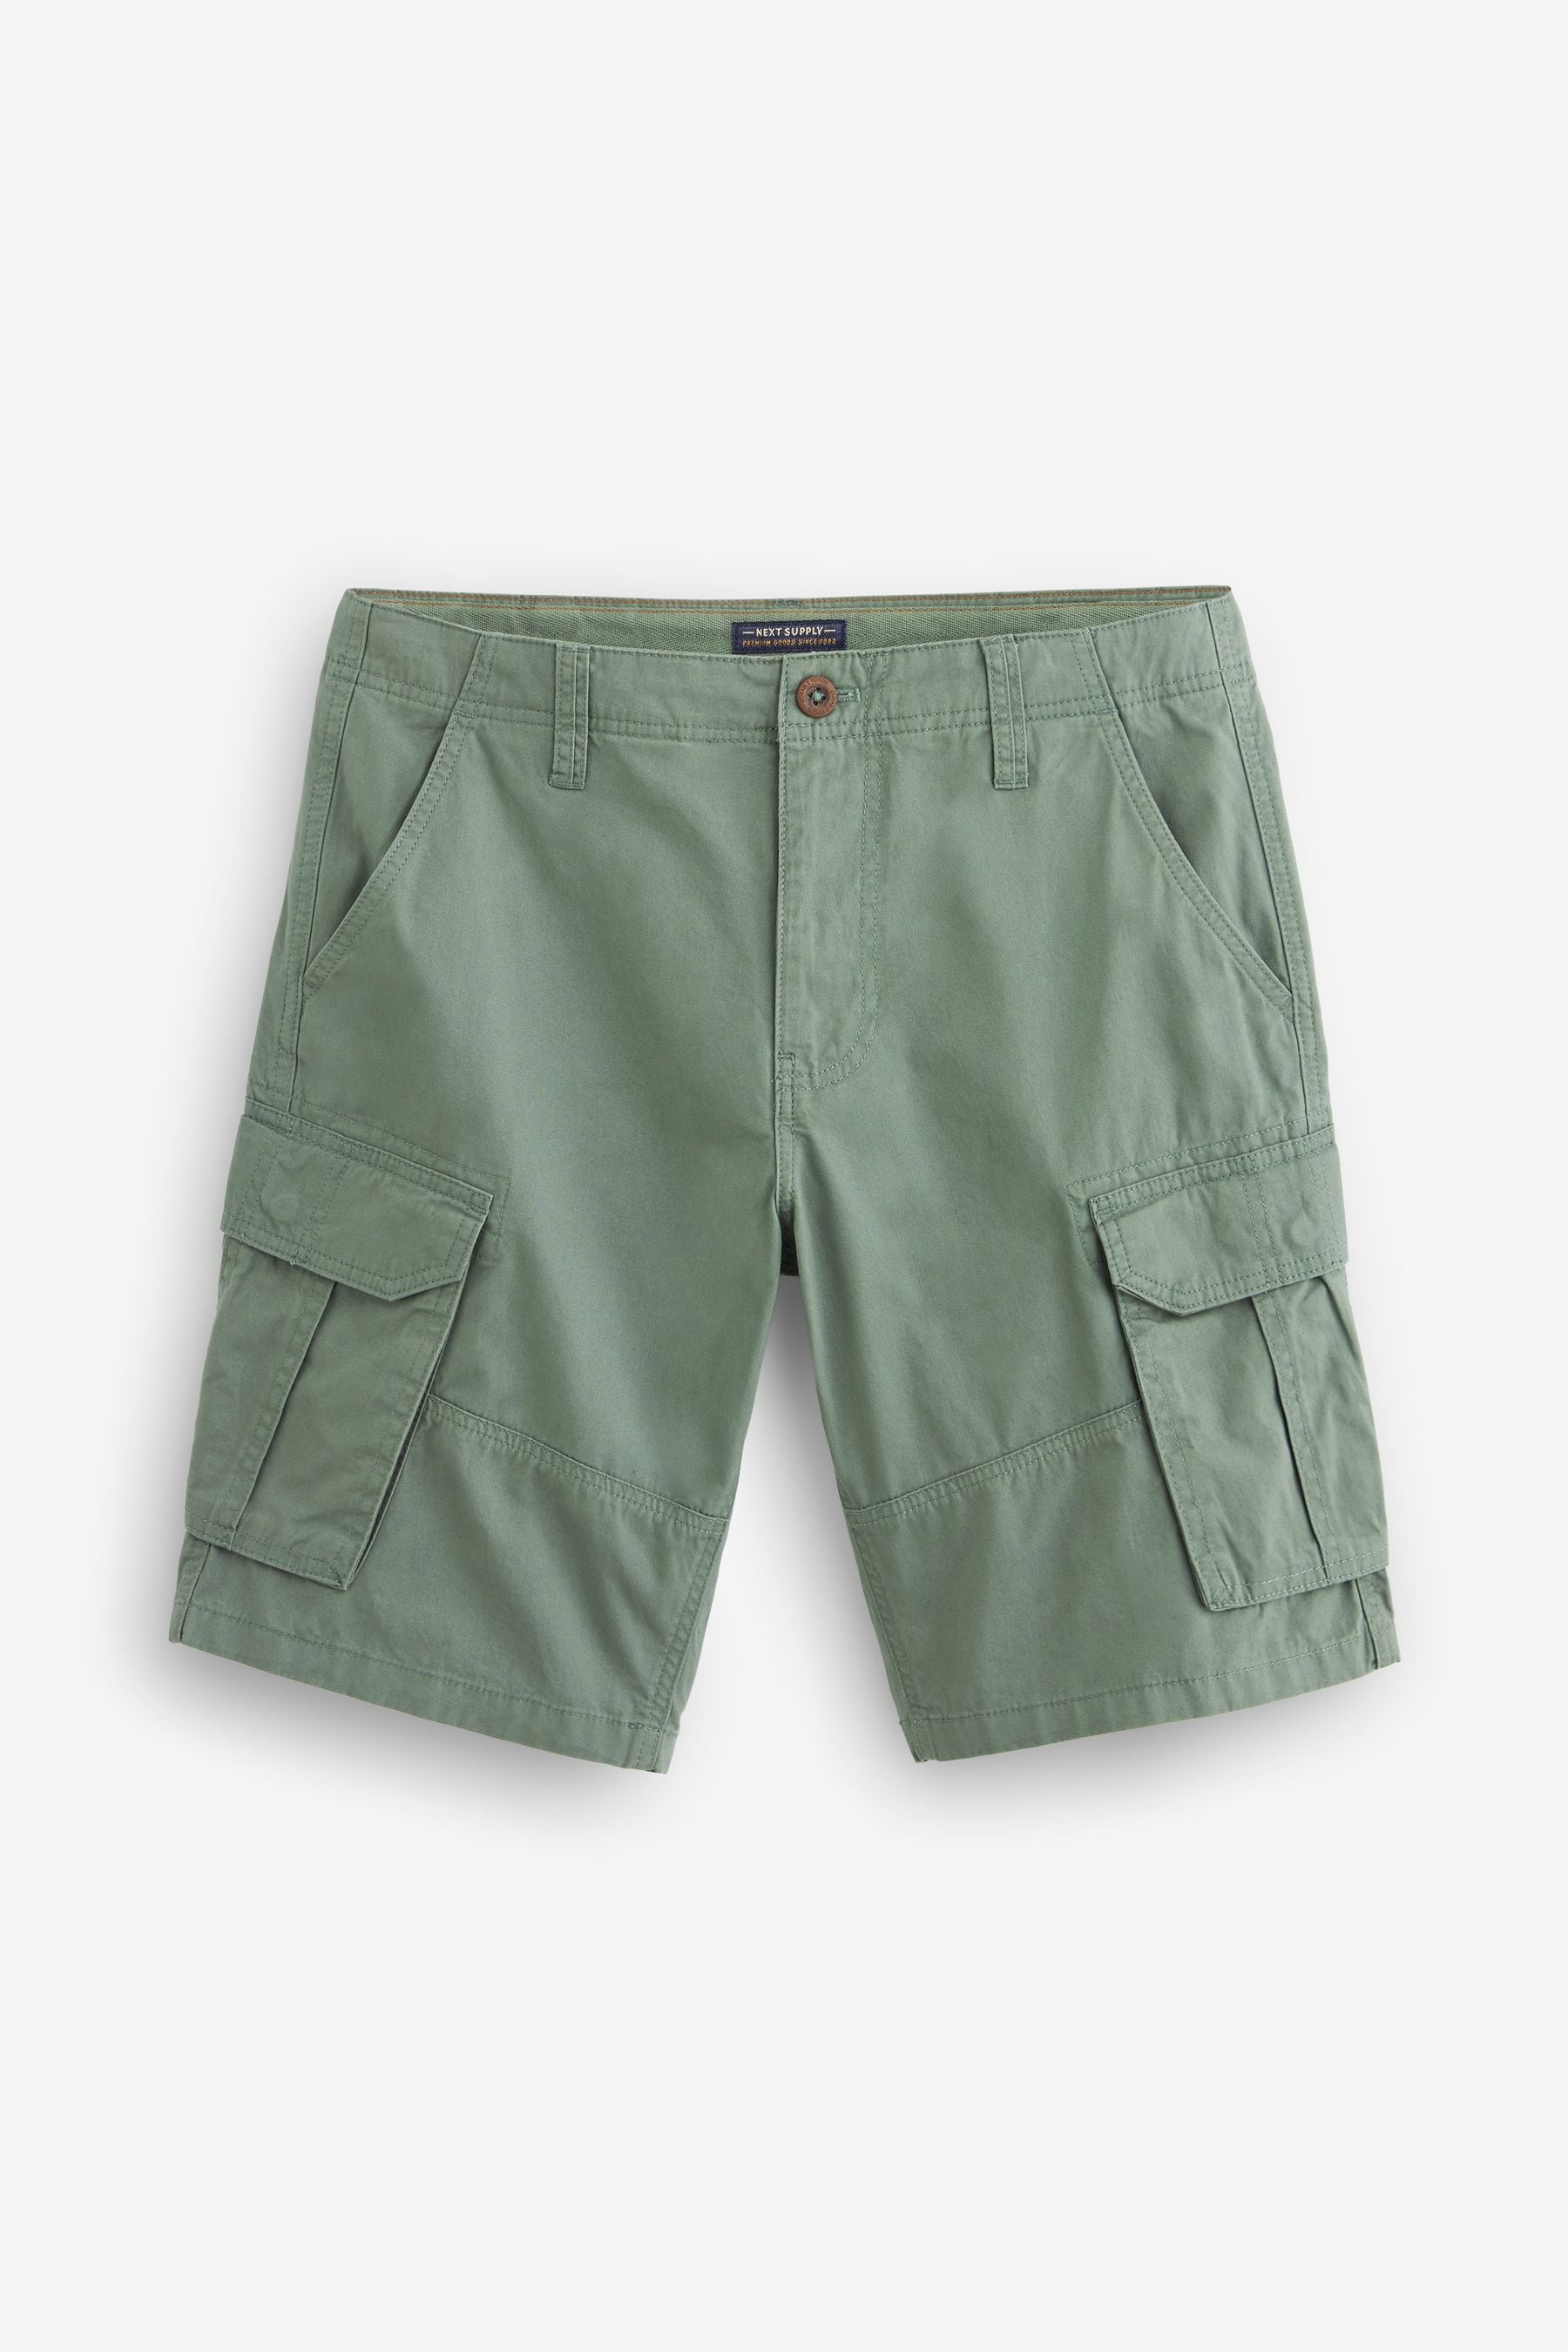 Buy Sage Green Cotton Cargo Shorts from the Next UK online shop